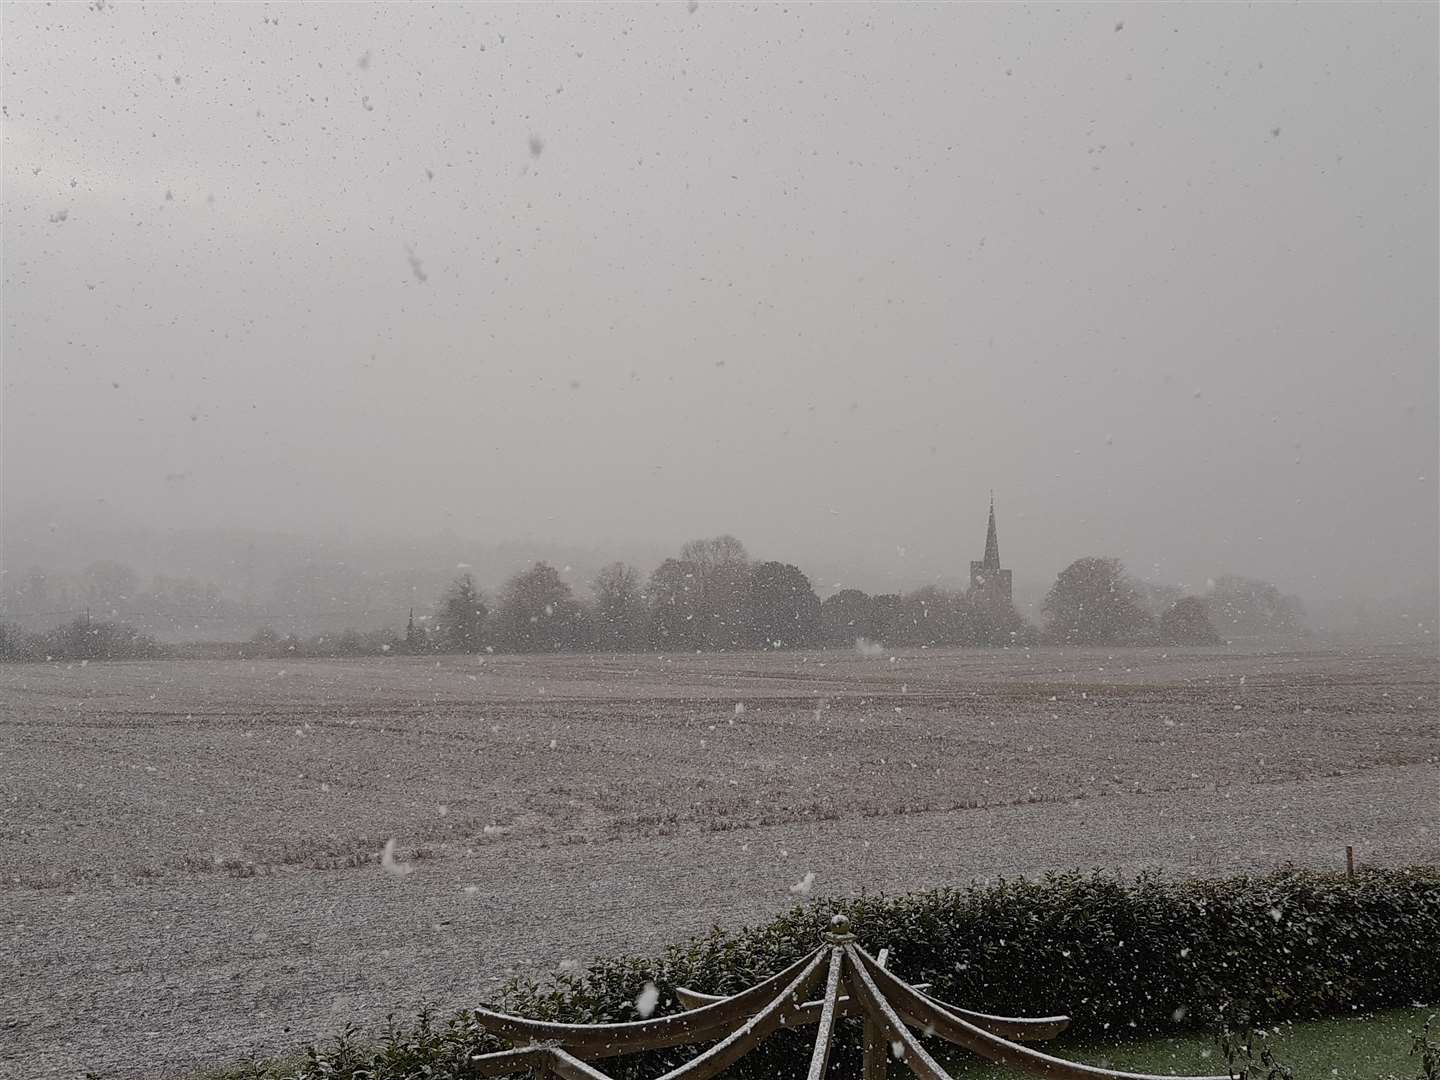 Snow laying in fields in Barming near Maidstone